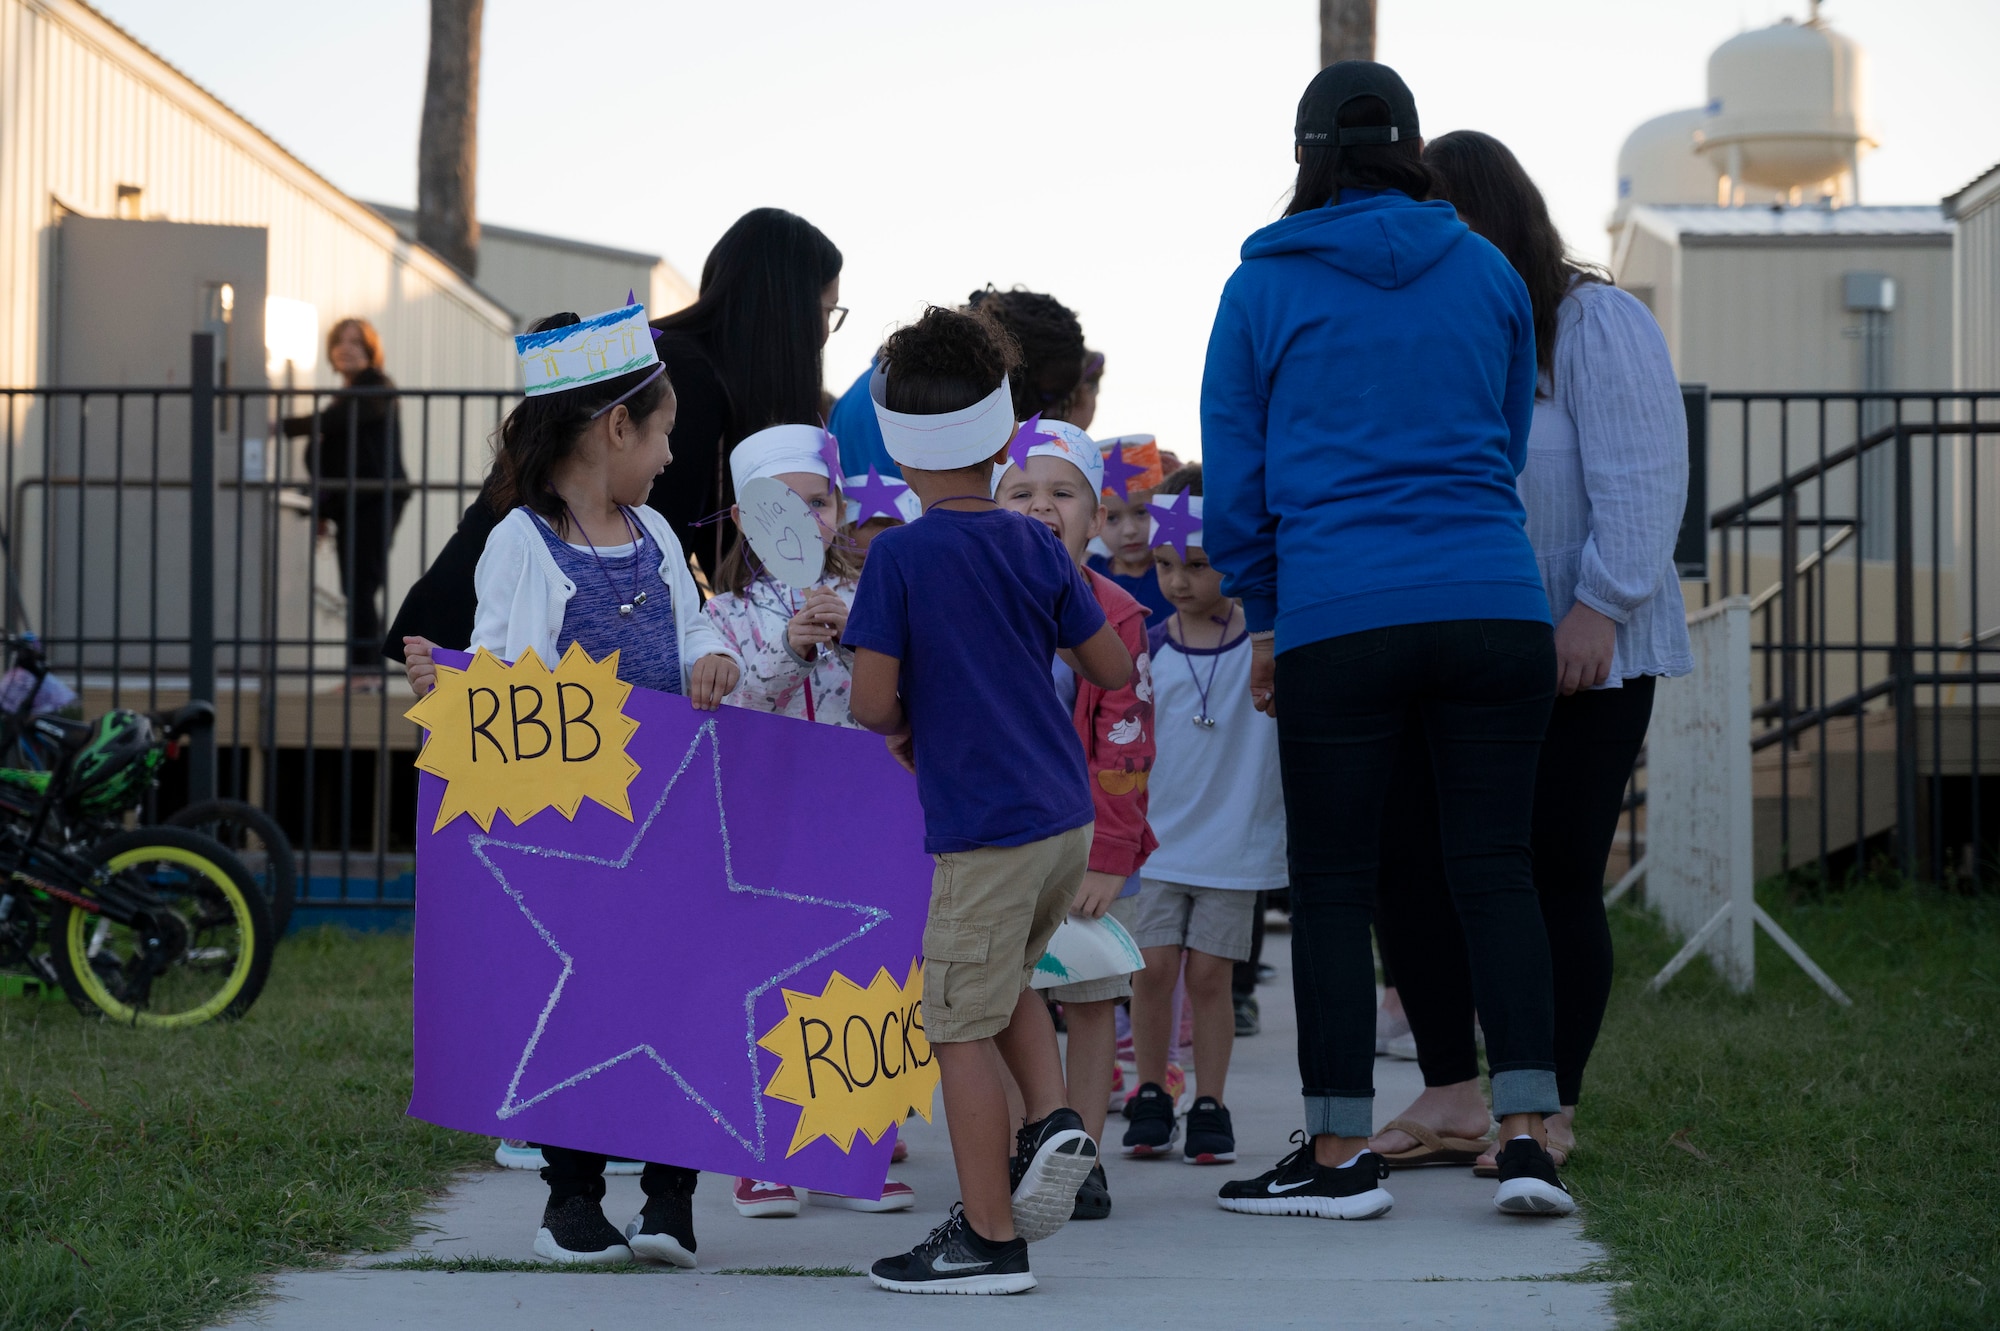 Staﬀ and students from the Roberto Bobby Barrera (RBB) Elementary School prepare to walk the “Purple Parade” held at Laughlin Air Force Base, Texas, Sept. 29, 2022. The “Purple Parade” was held in celebration of RBB Elementary School receiving the Purple Star Award, recognizing the support and commitment the school provides to meeting the unique needs of military-connected students and their families. (U.S. Air Force photo by Airman 1st Class Kailee Reynolds)